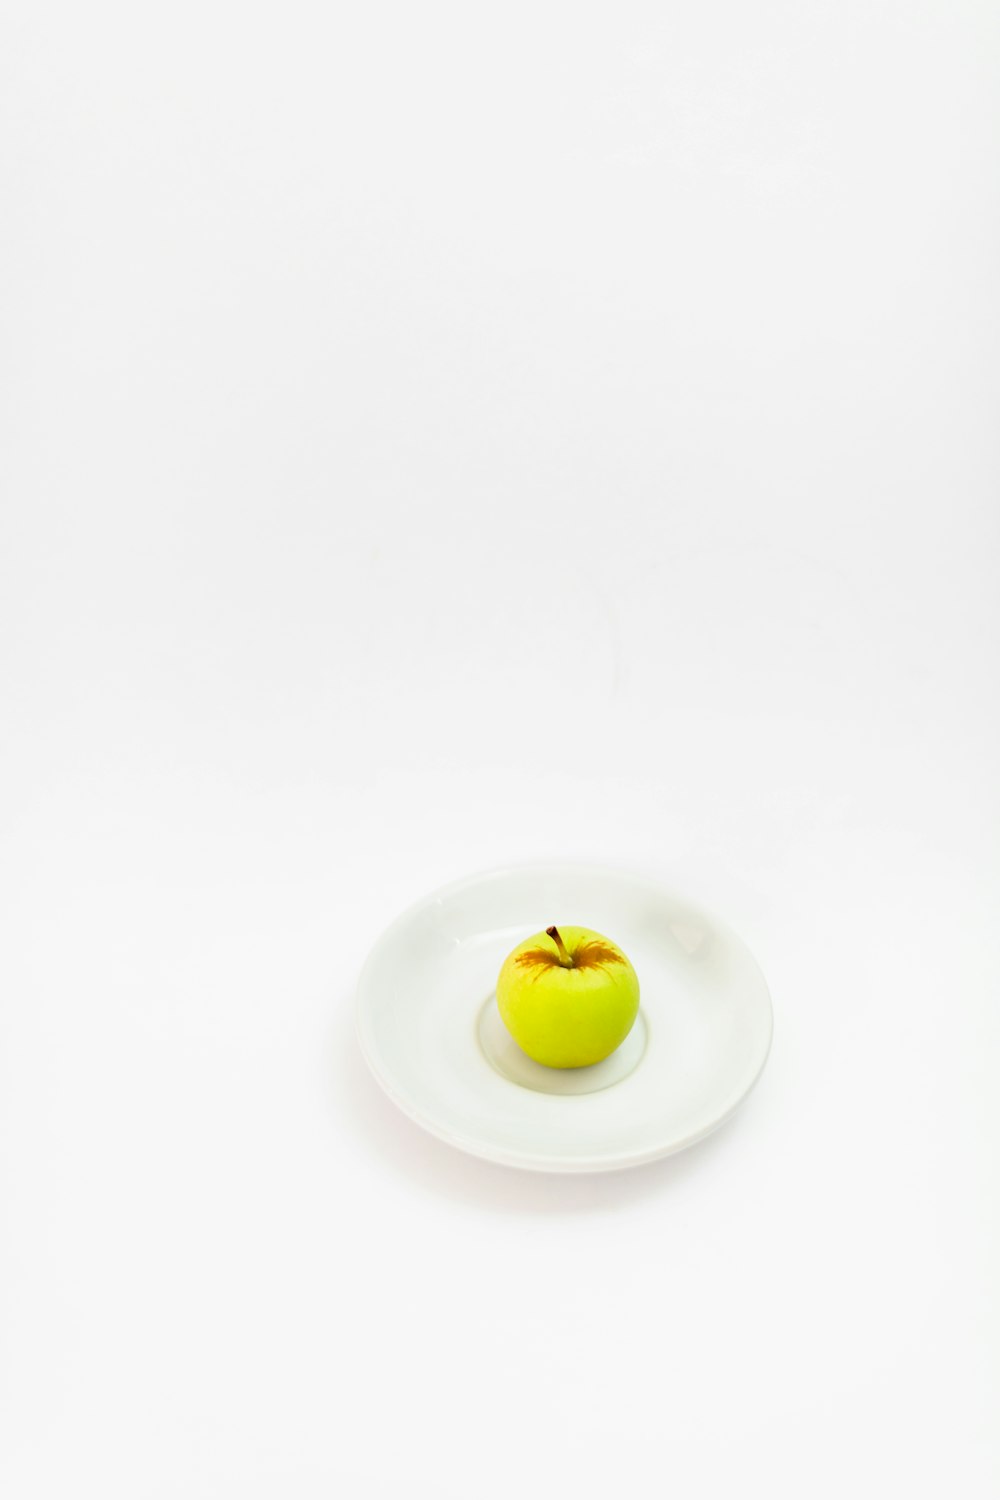 an apple on a plate on a white background